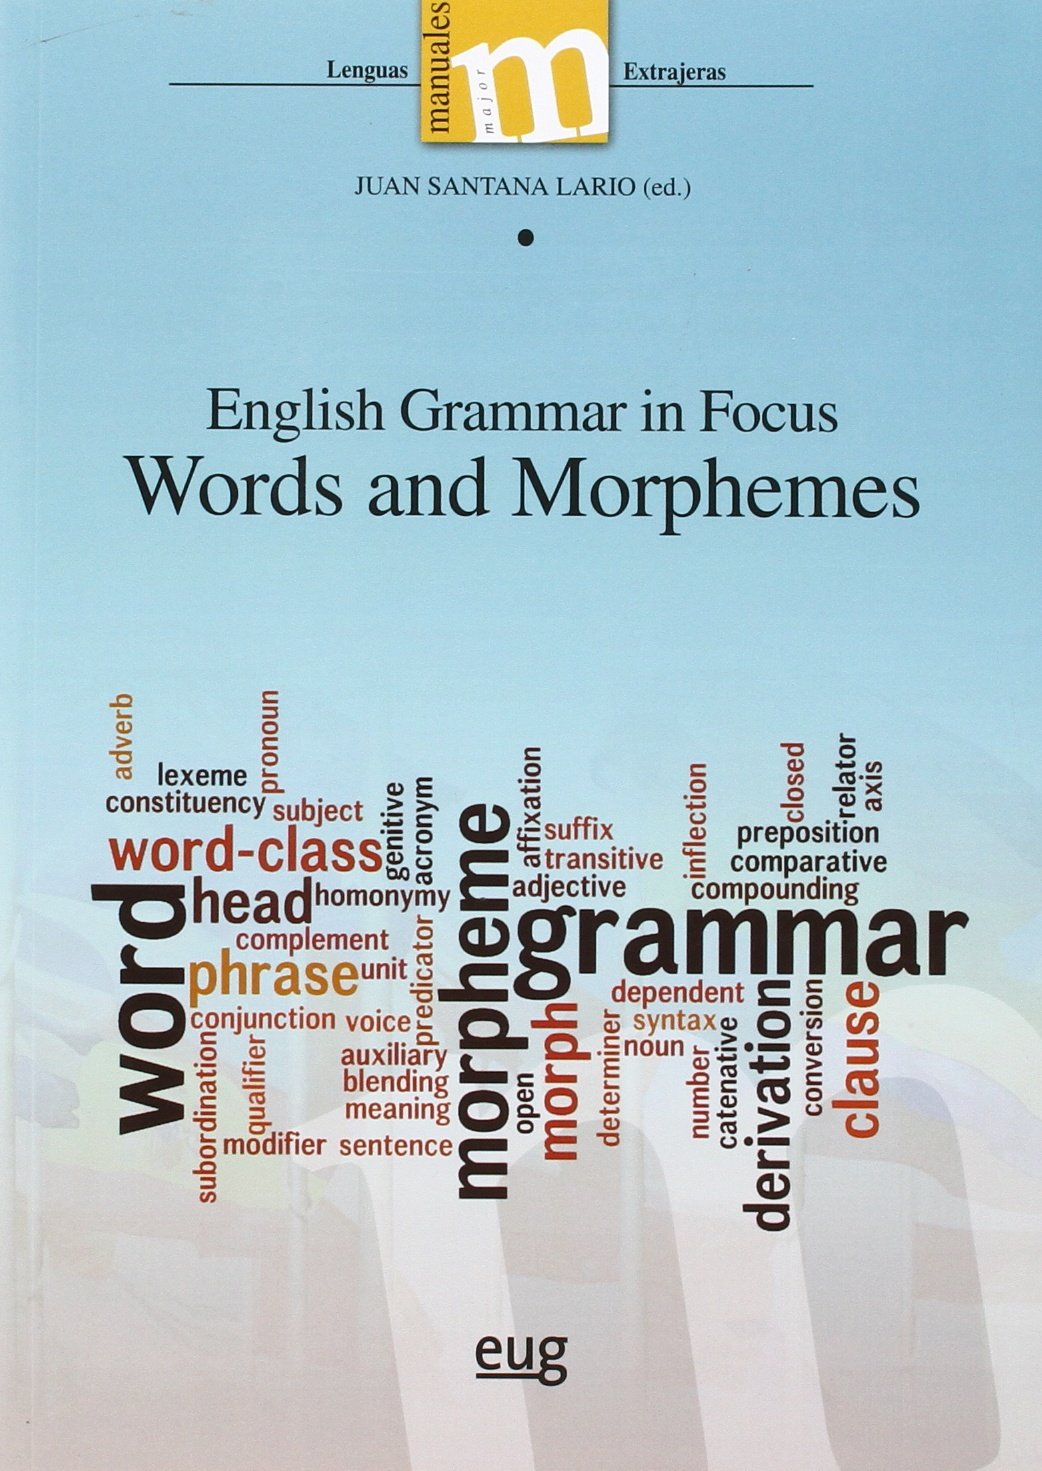 English Grammar in Focus: Words and Morphemes